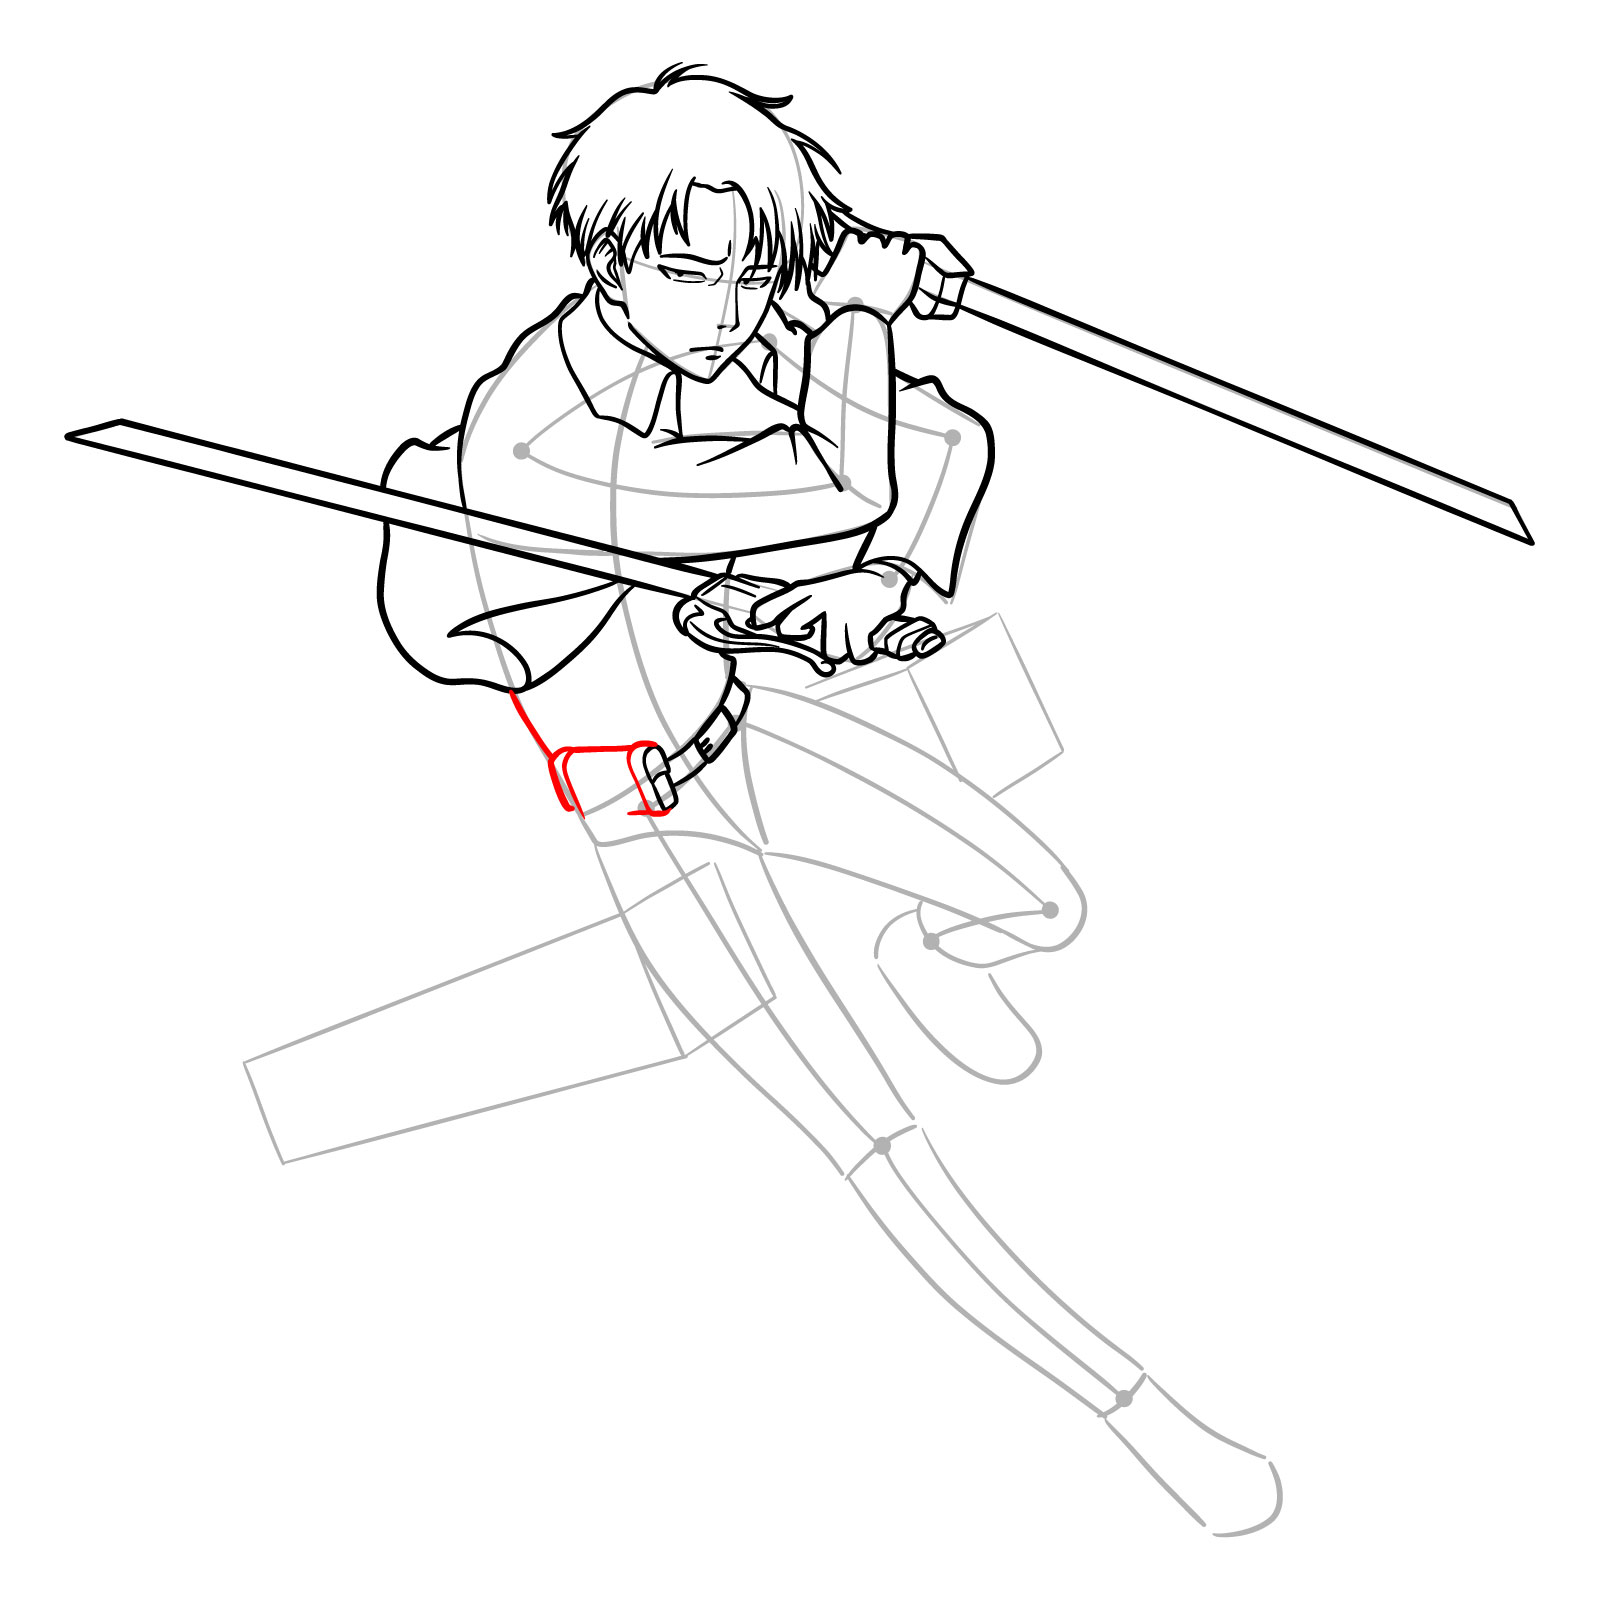 Details of Captain Levi's utility belt and waist in an action pose drawing - step 18